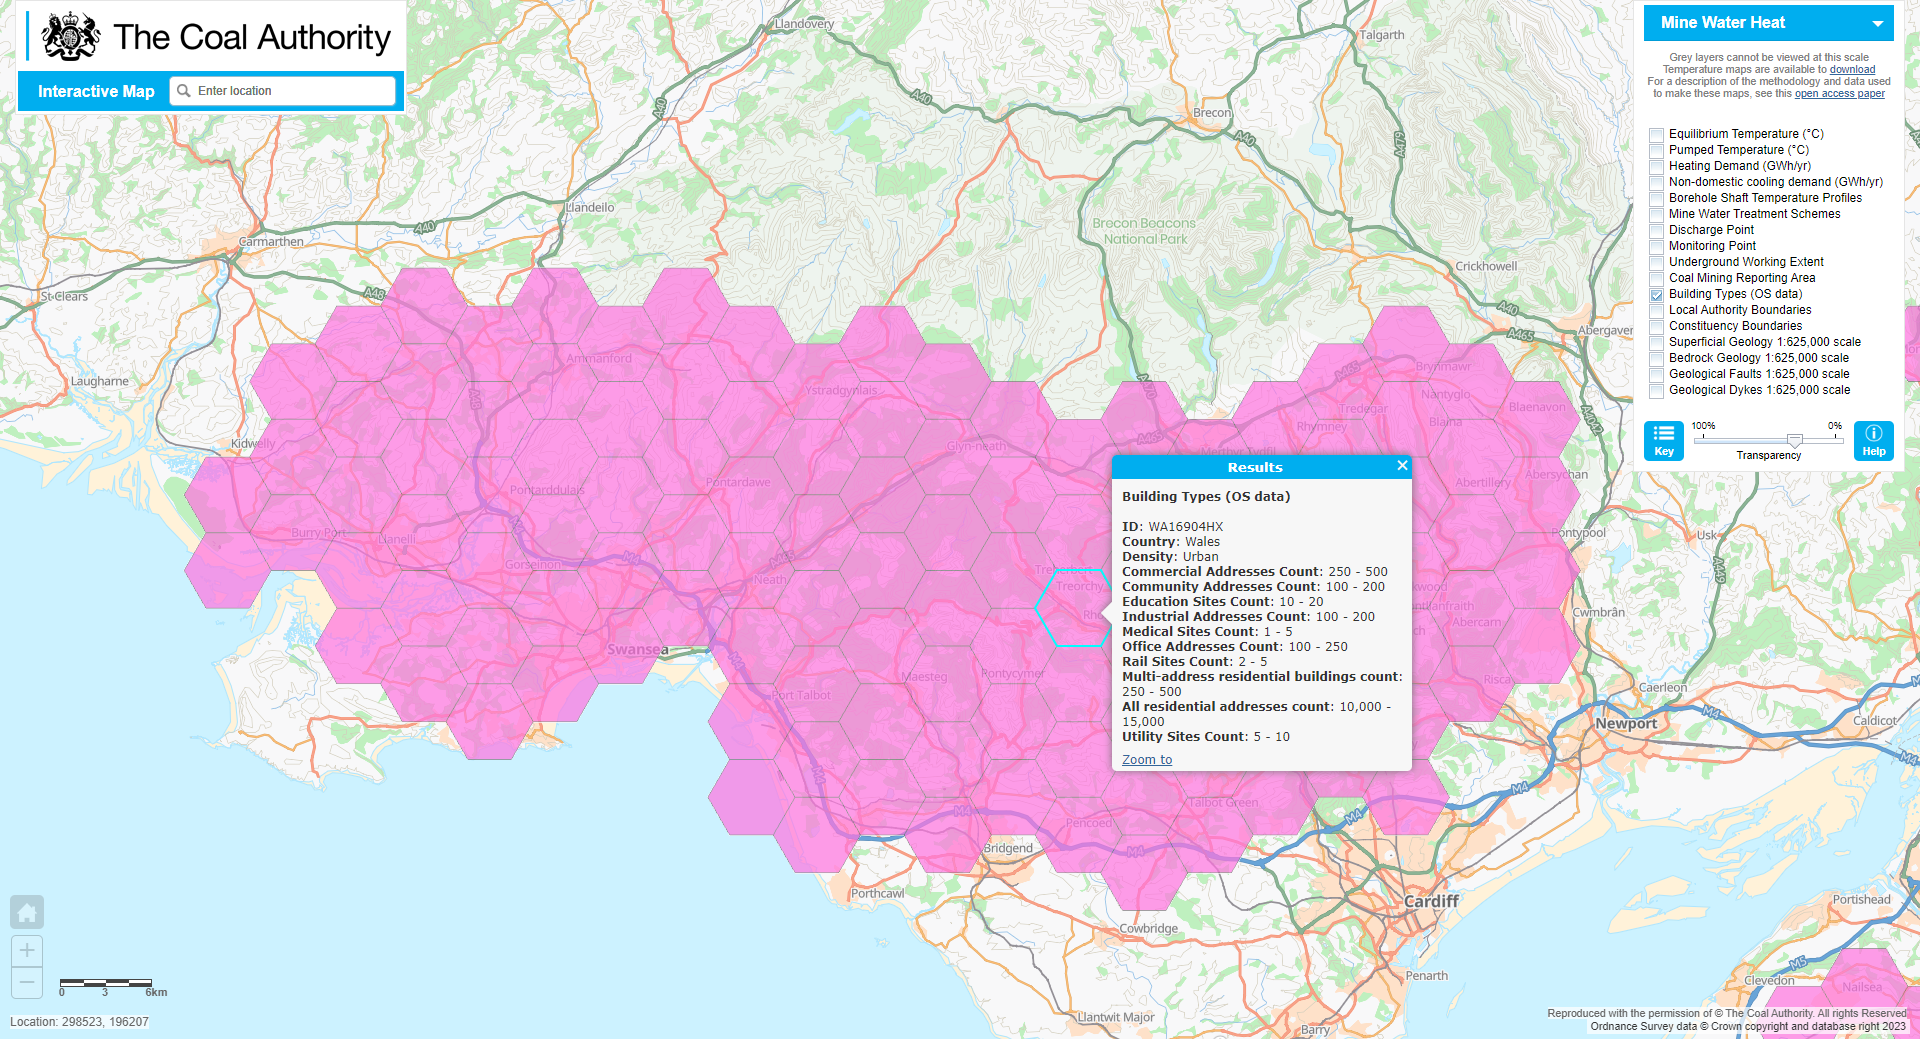 A map display showing building types in Wales over recorded abandoned coal mine workings, highlighted in pink..